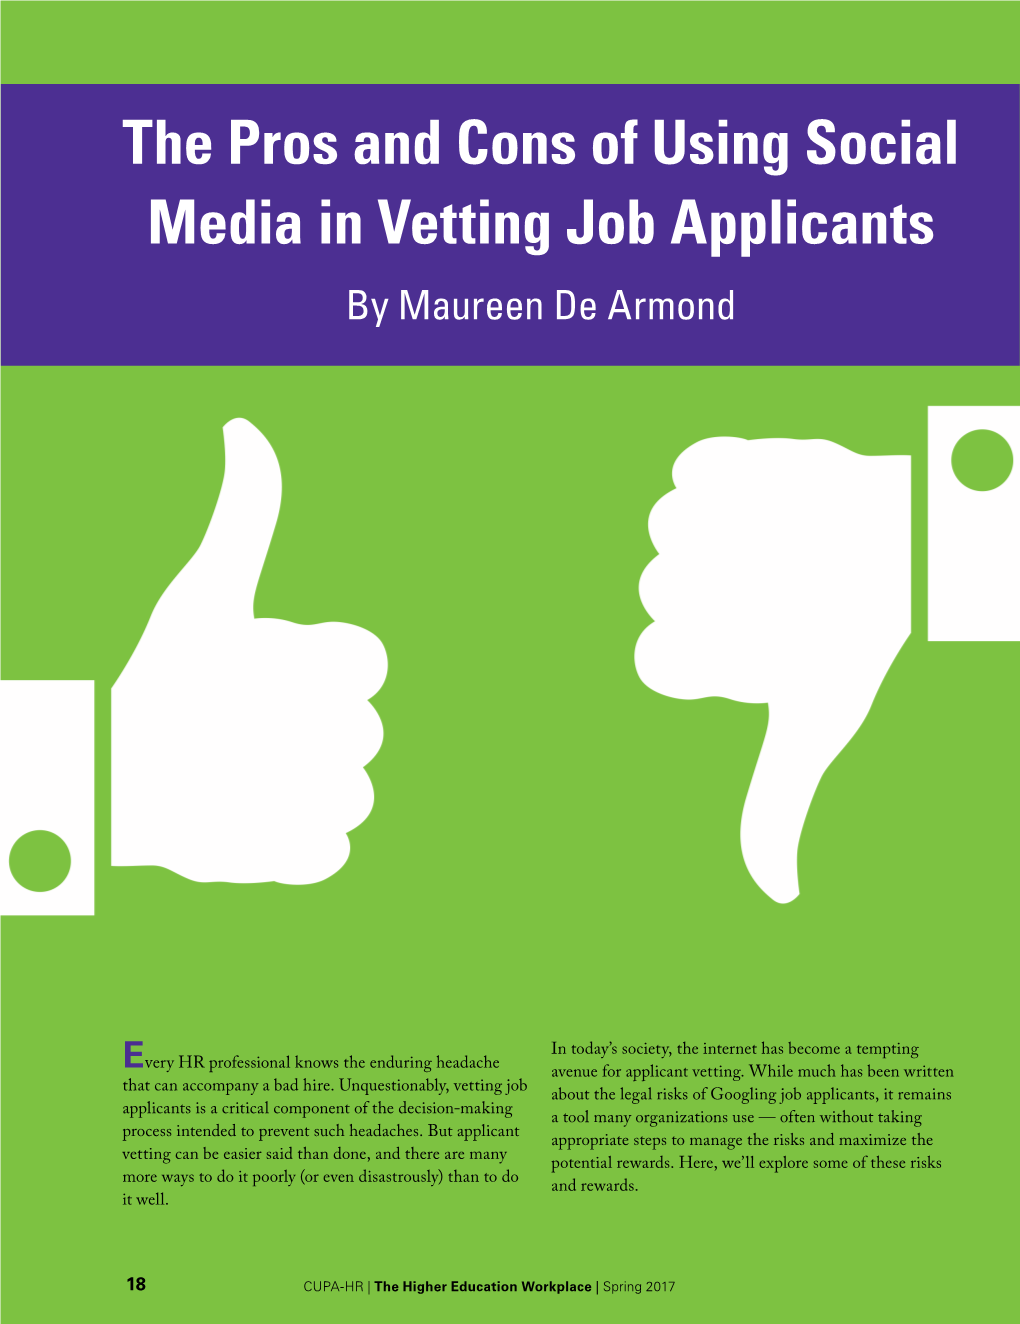 The Pros and Cons of Using Social Media in Vetting Job Applicants by Maureen De Armond